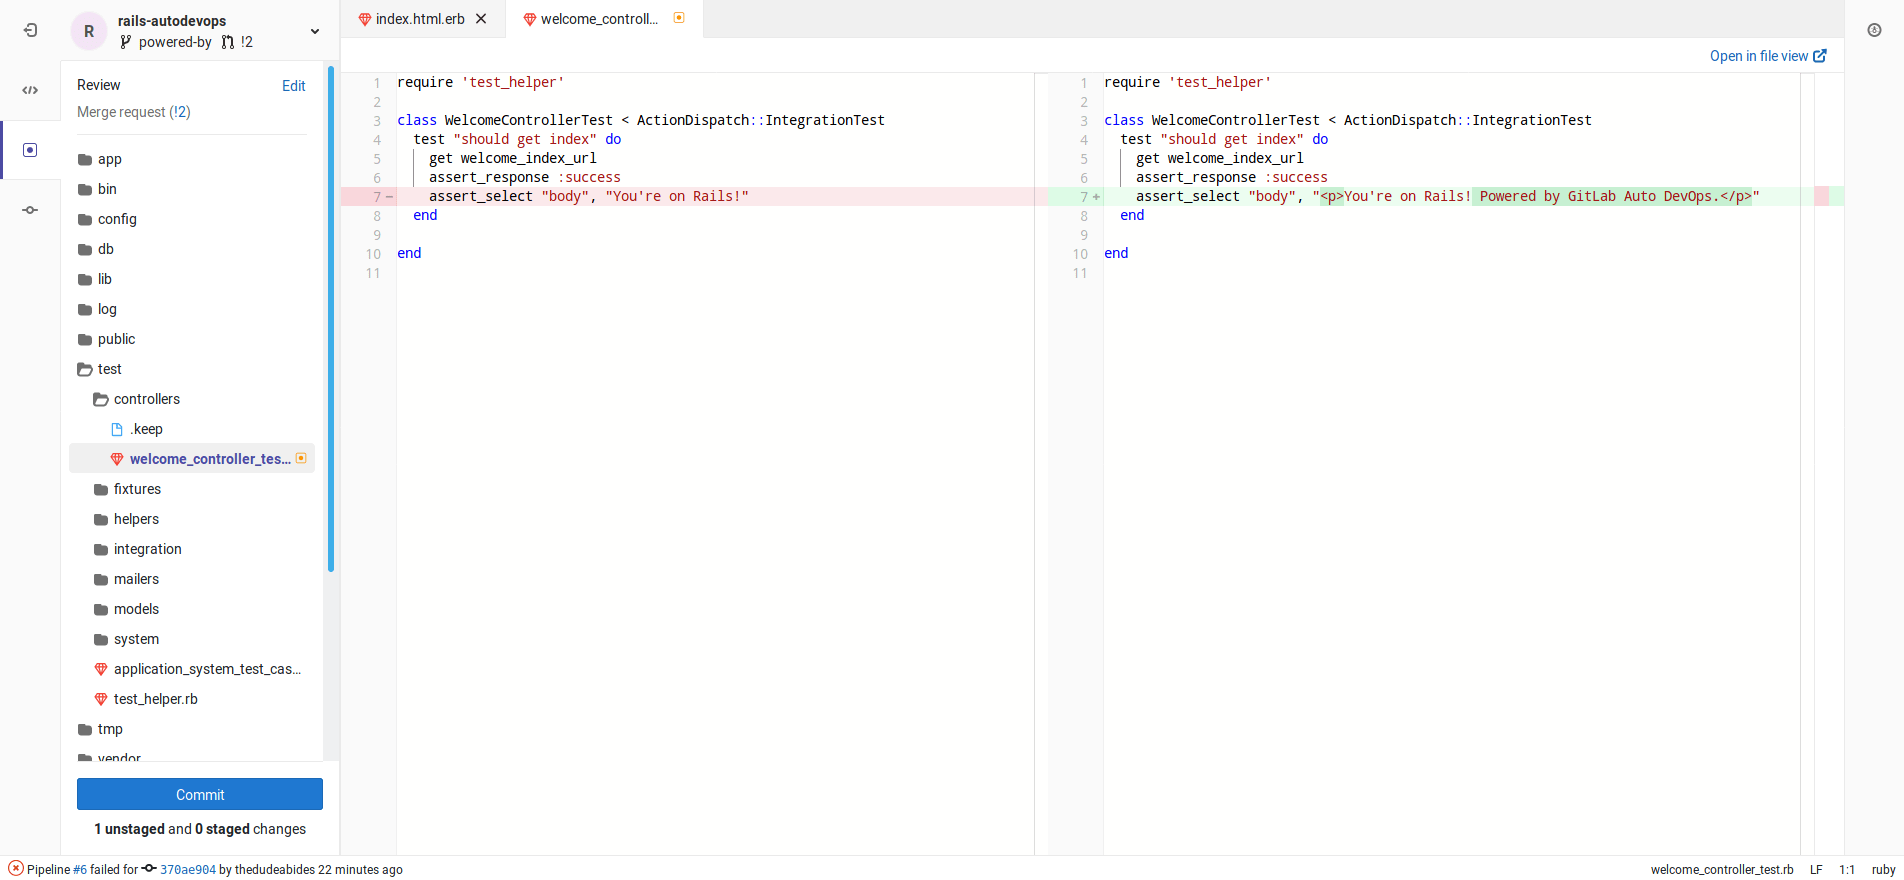 doc/topics/autodevops/img/guide_merge_request_ide.png